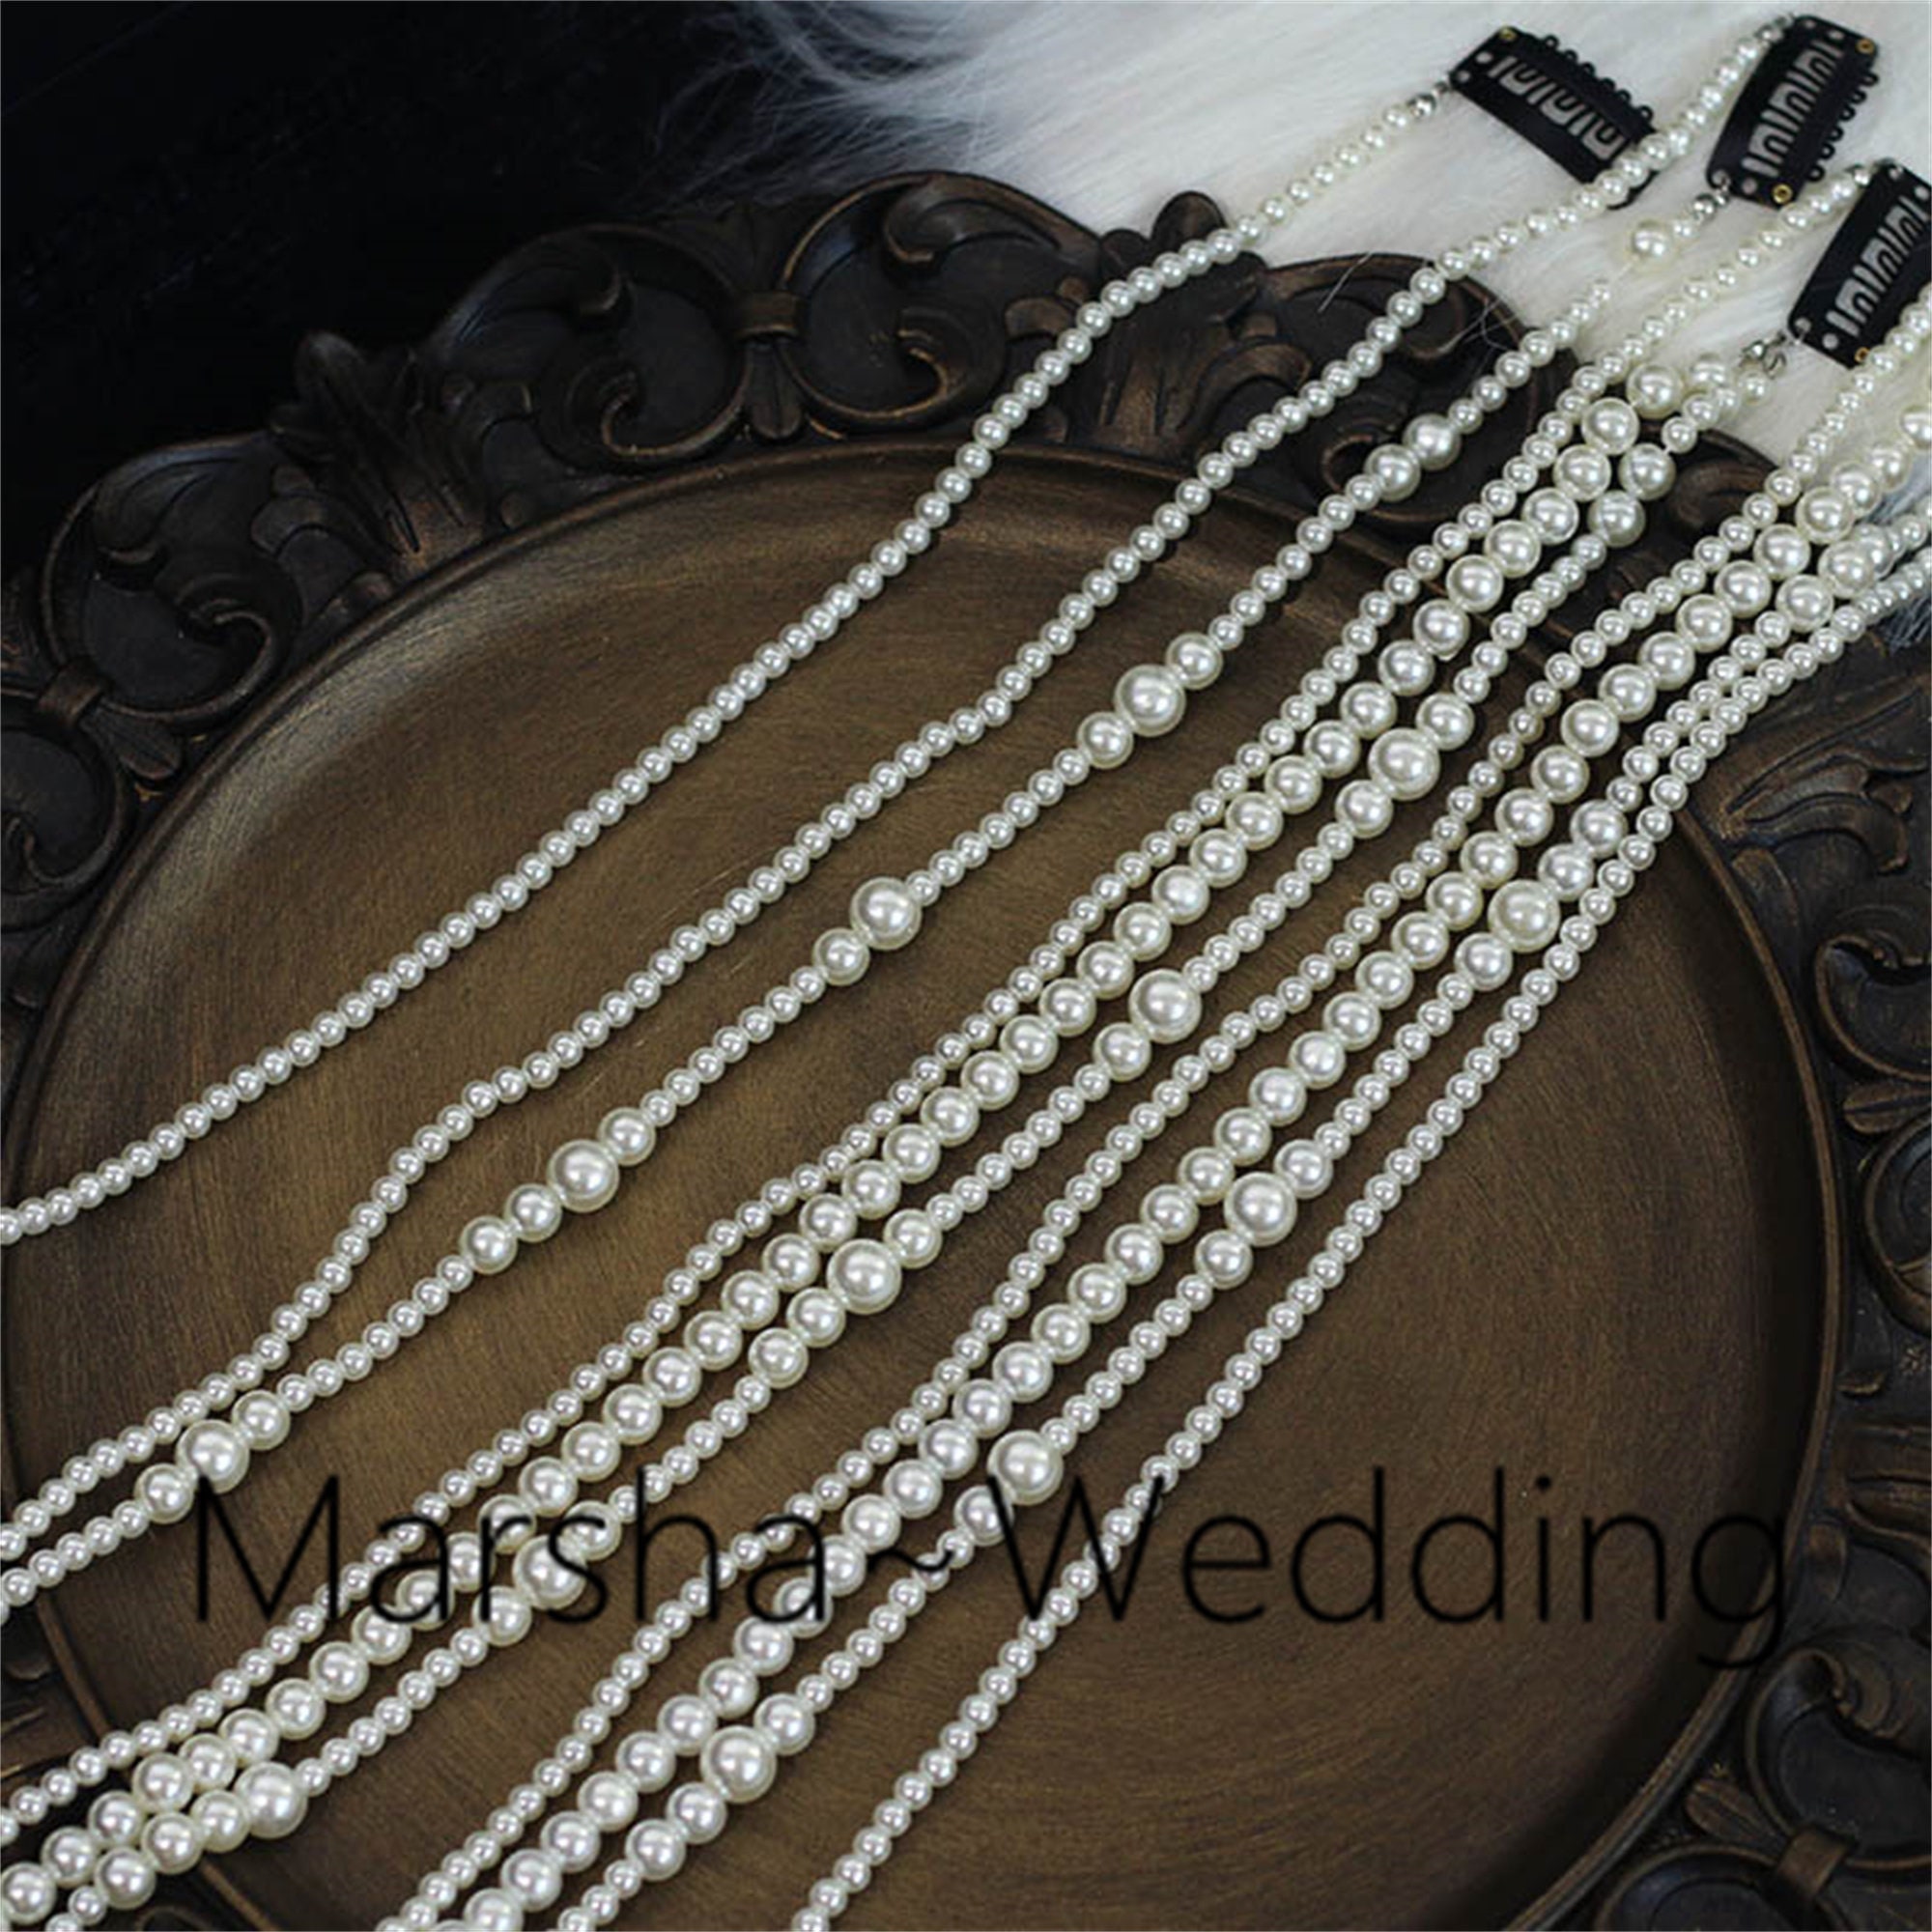 Anime 2 Rupee Items 3 Color Rope Chain Strand 10mm White Pearl